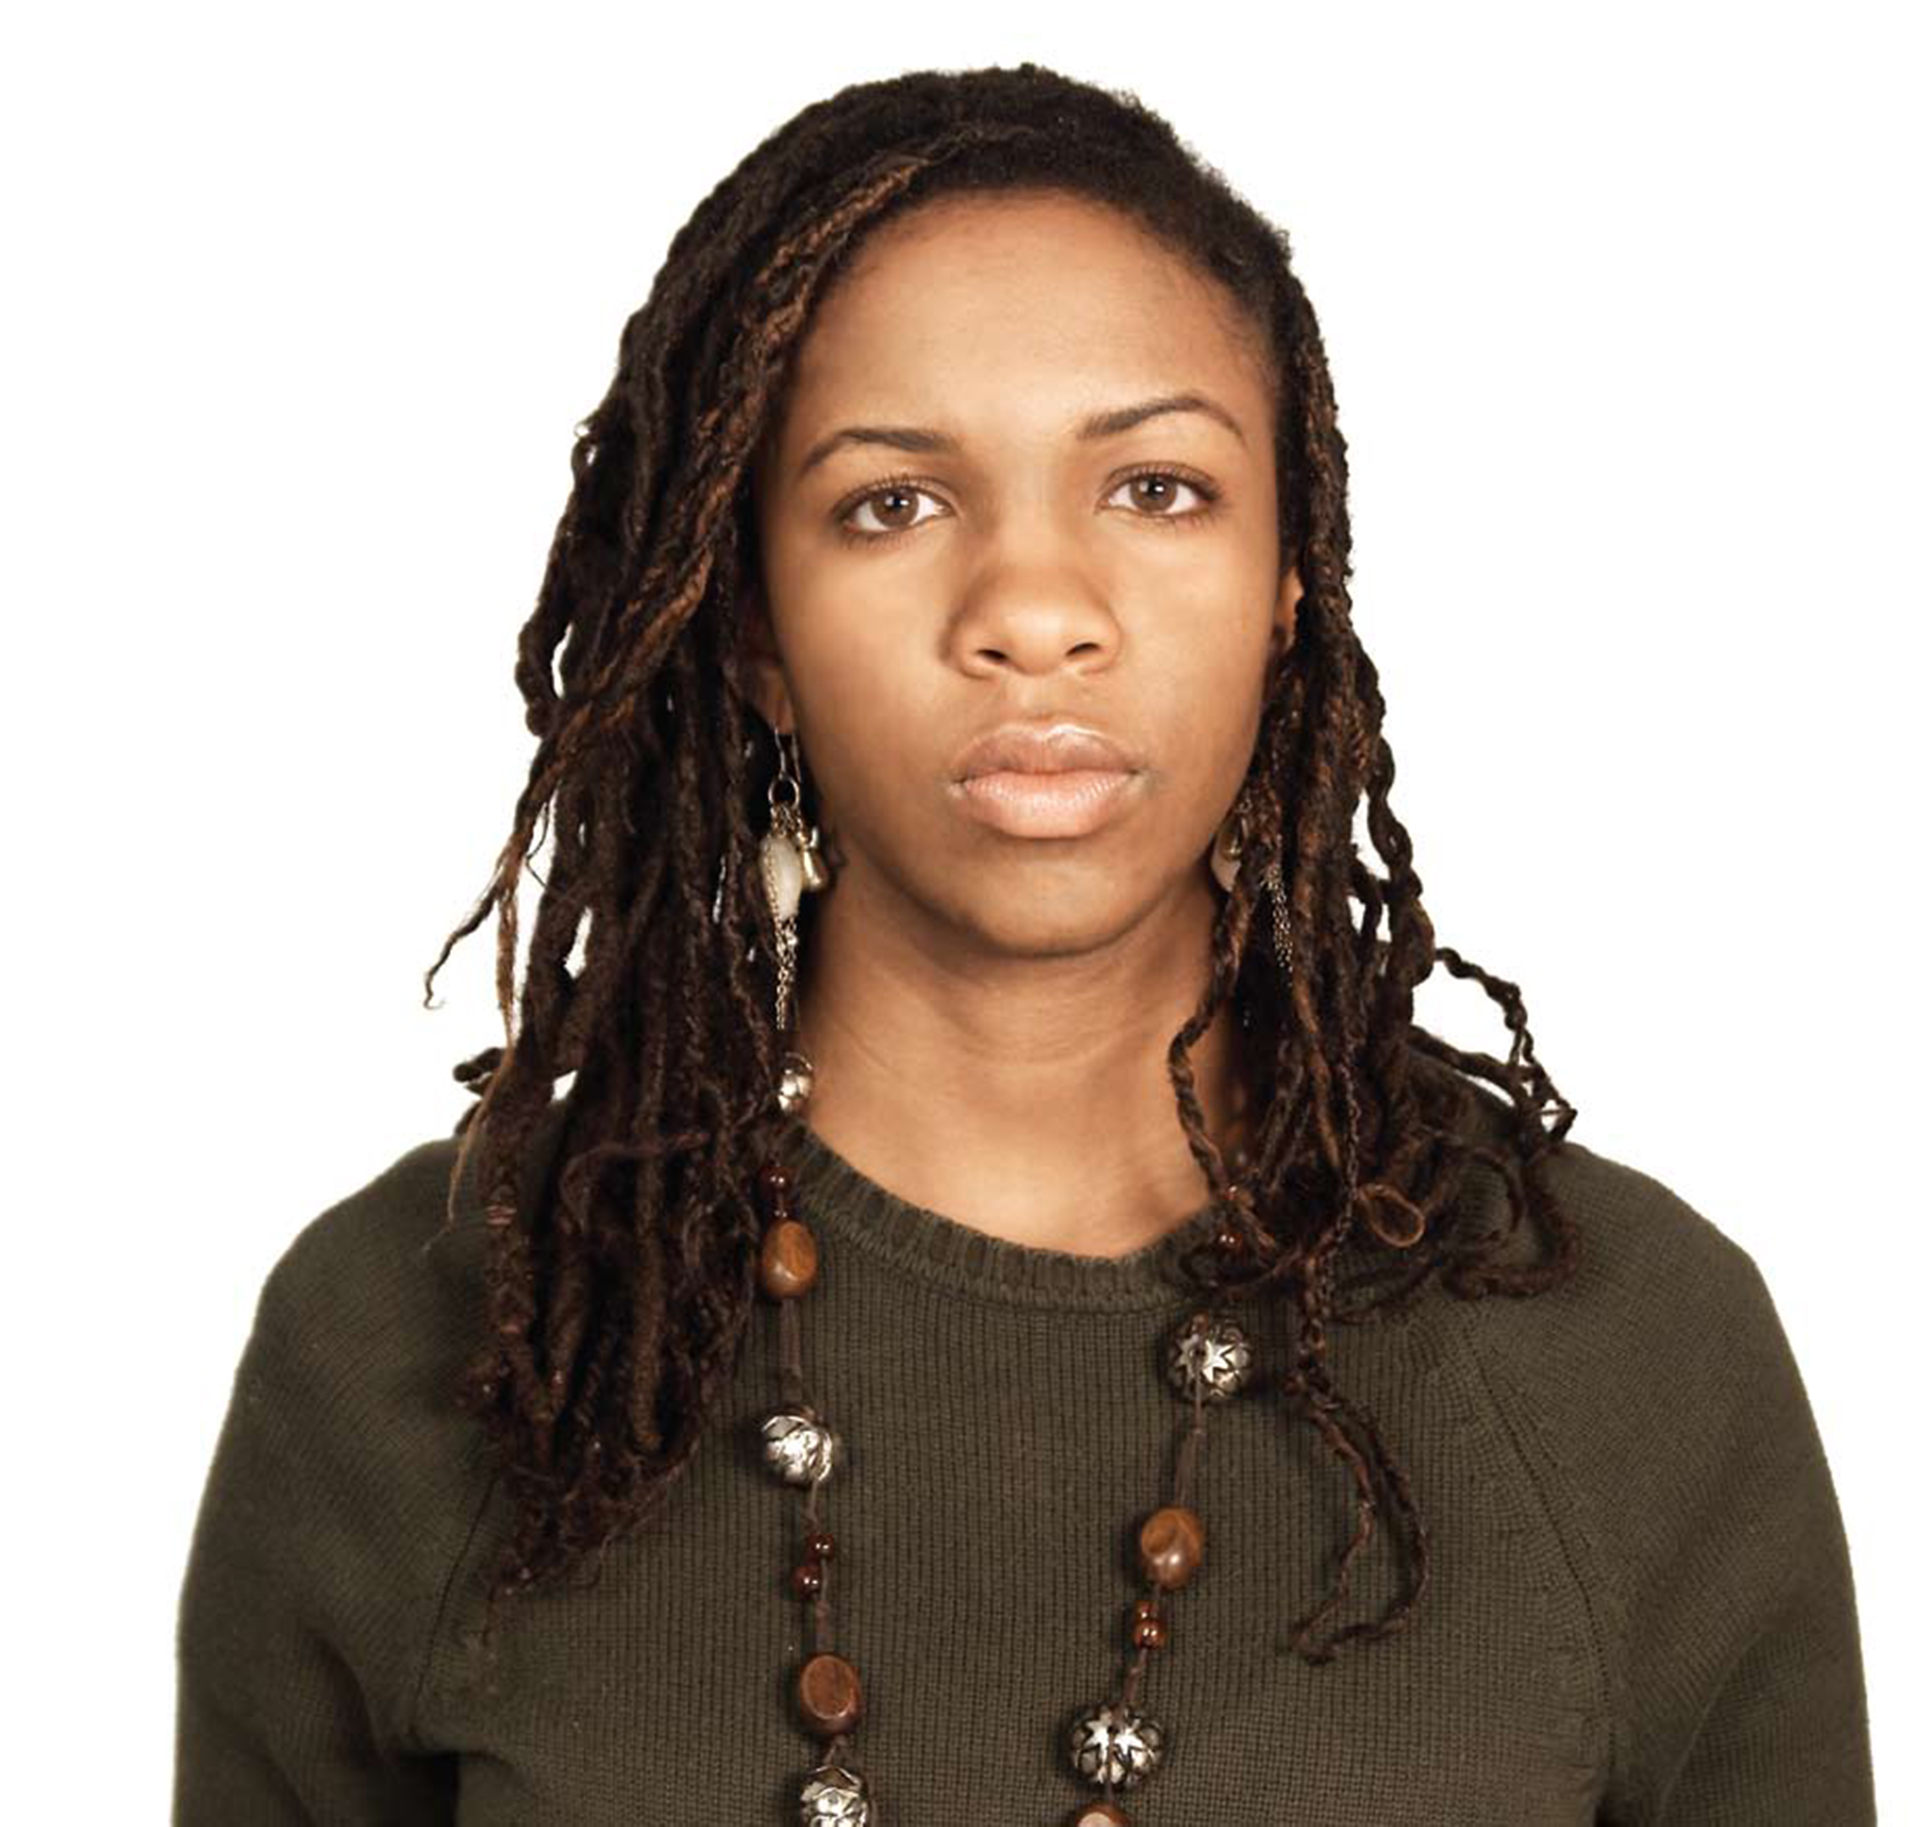 An image of a Black woman chest up, looking straight at the camera. She has long brown braids and is wearing a dark green sweater with a long necklace and dangling earrings. 